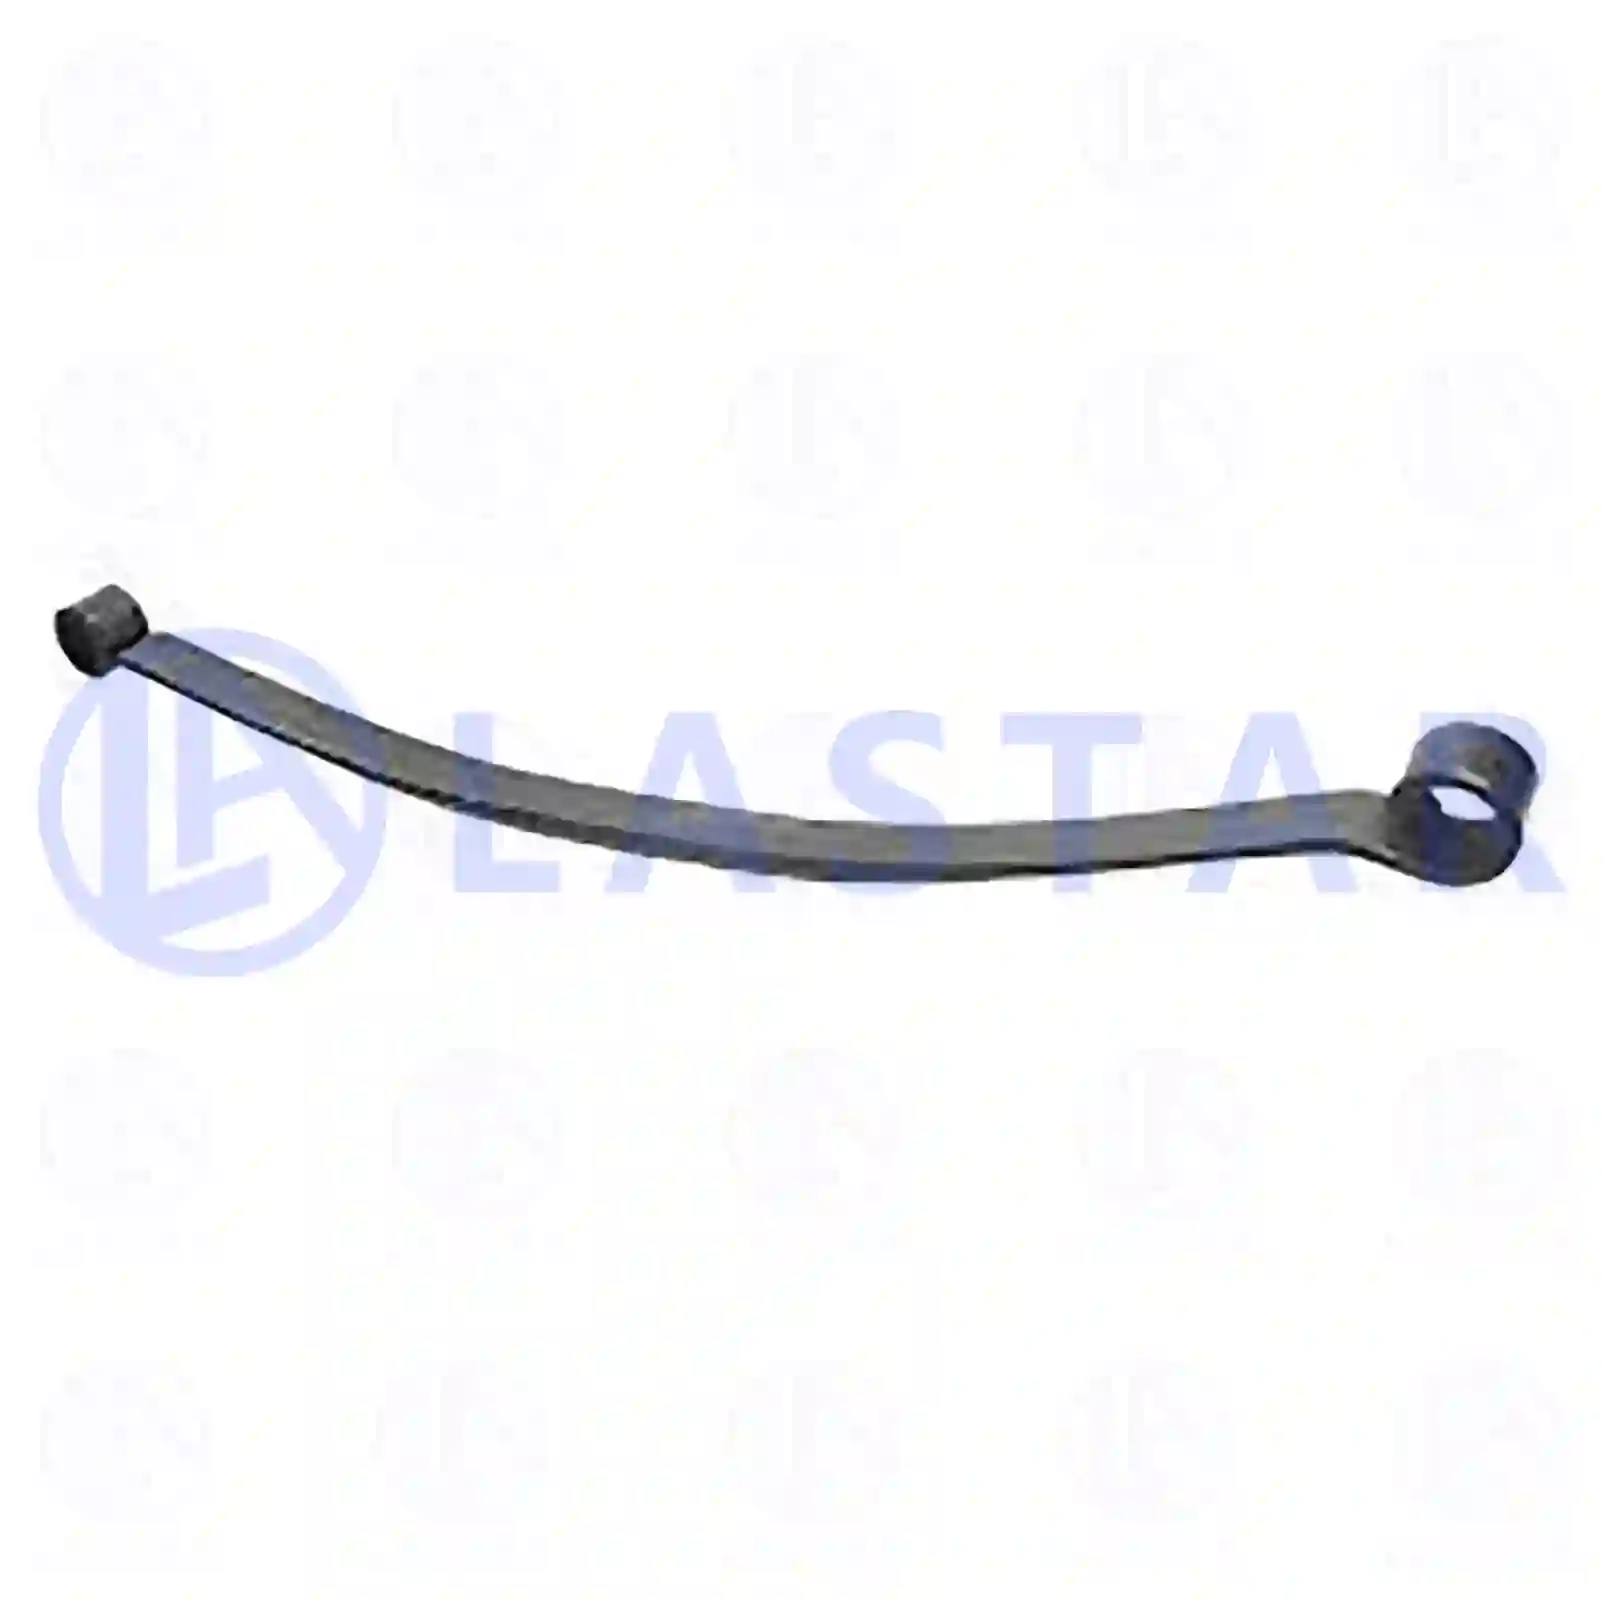 Leaf spring, 77728047, 9063201806, 9063207506, 2E0511131R ||  77728047 Lastar Spare Part | Truck Spare Parts, Auotomotive Spare Parts Leaf spring, 77728047, 9063201806, 9063207506, 2E0511131R ||  77728047 Lastar Spare Part | Truck Spare Parts, Auotomotive Spare Parts